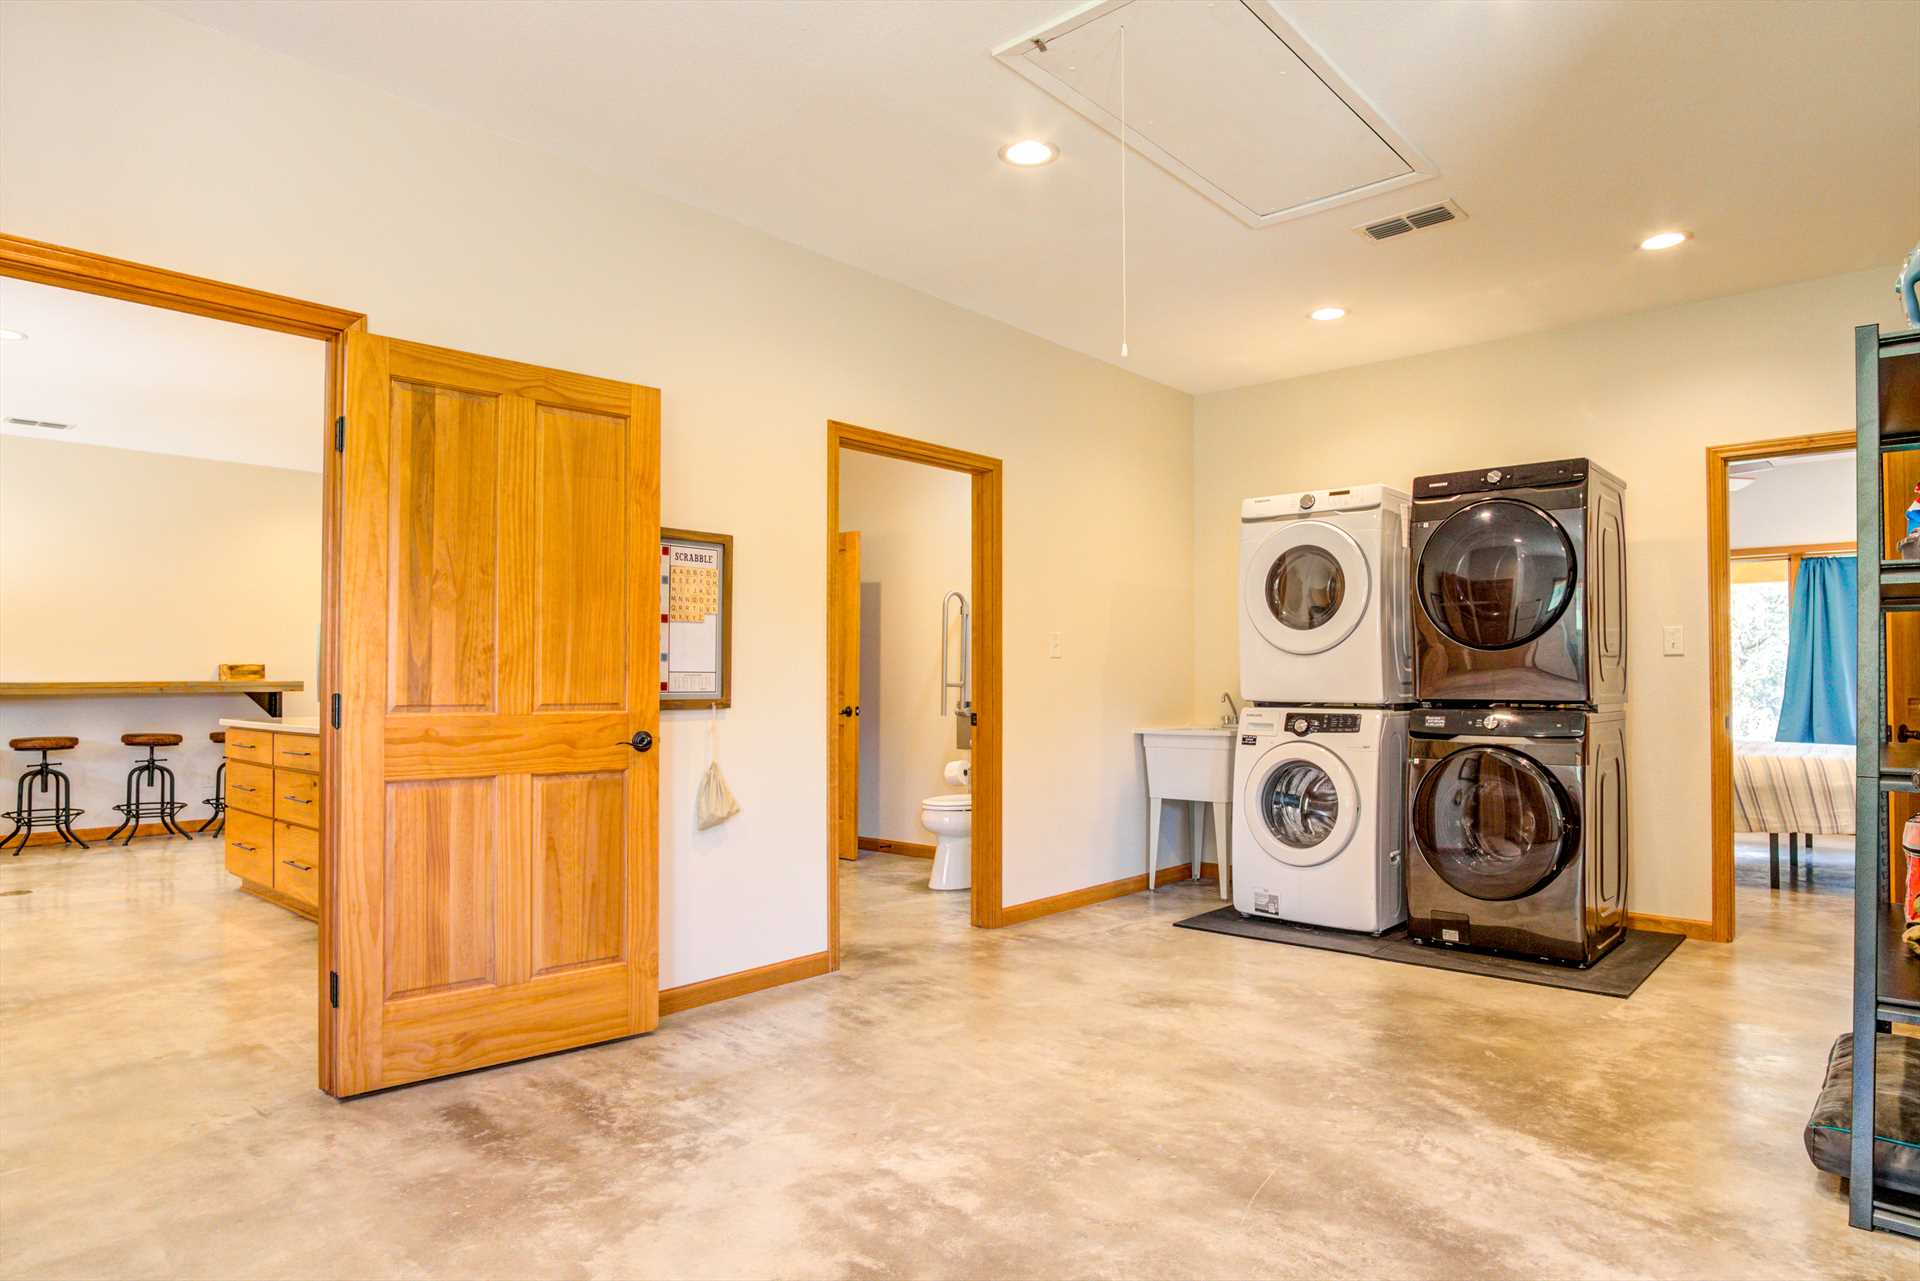                                                 No laundry blues here! The ranch has a utility space with TWO sets of washers and dryers.